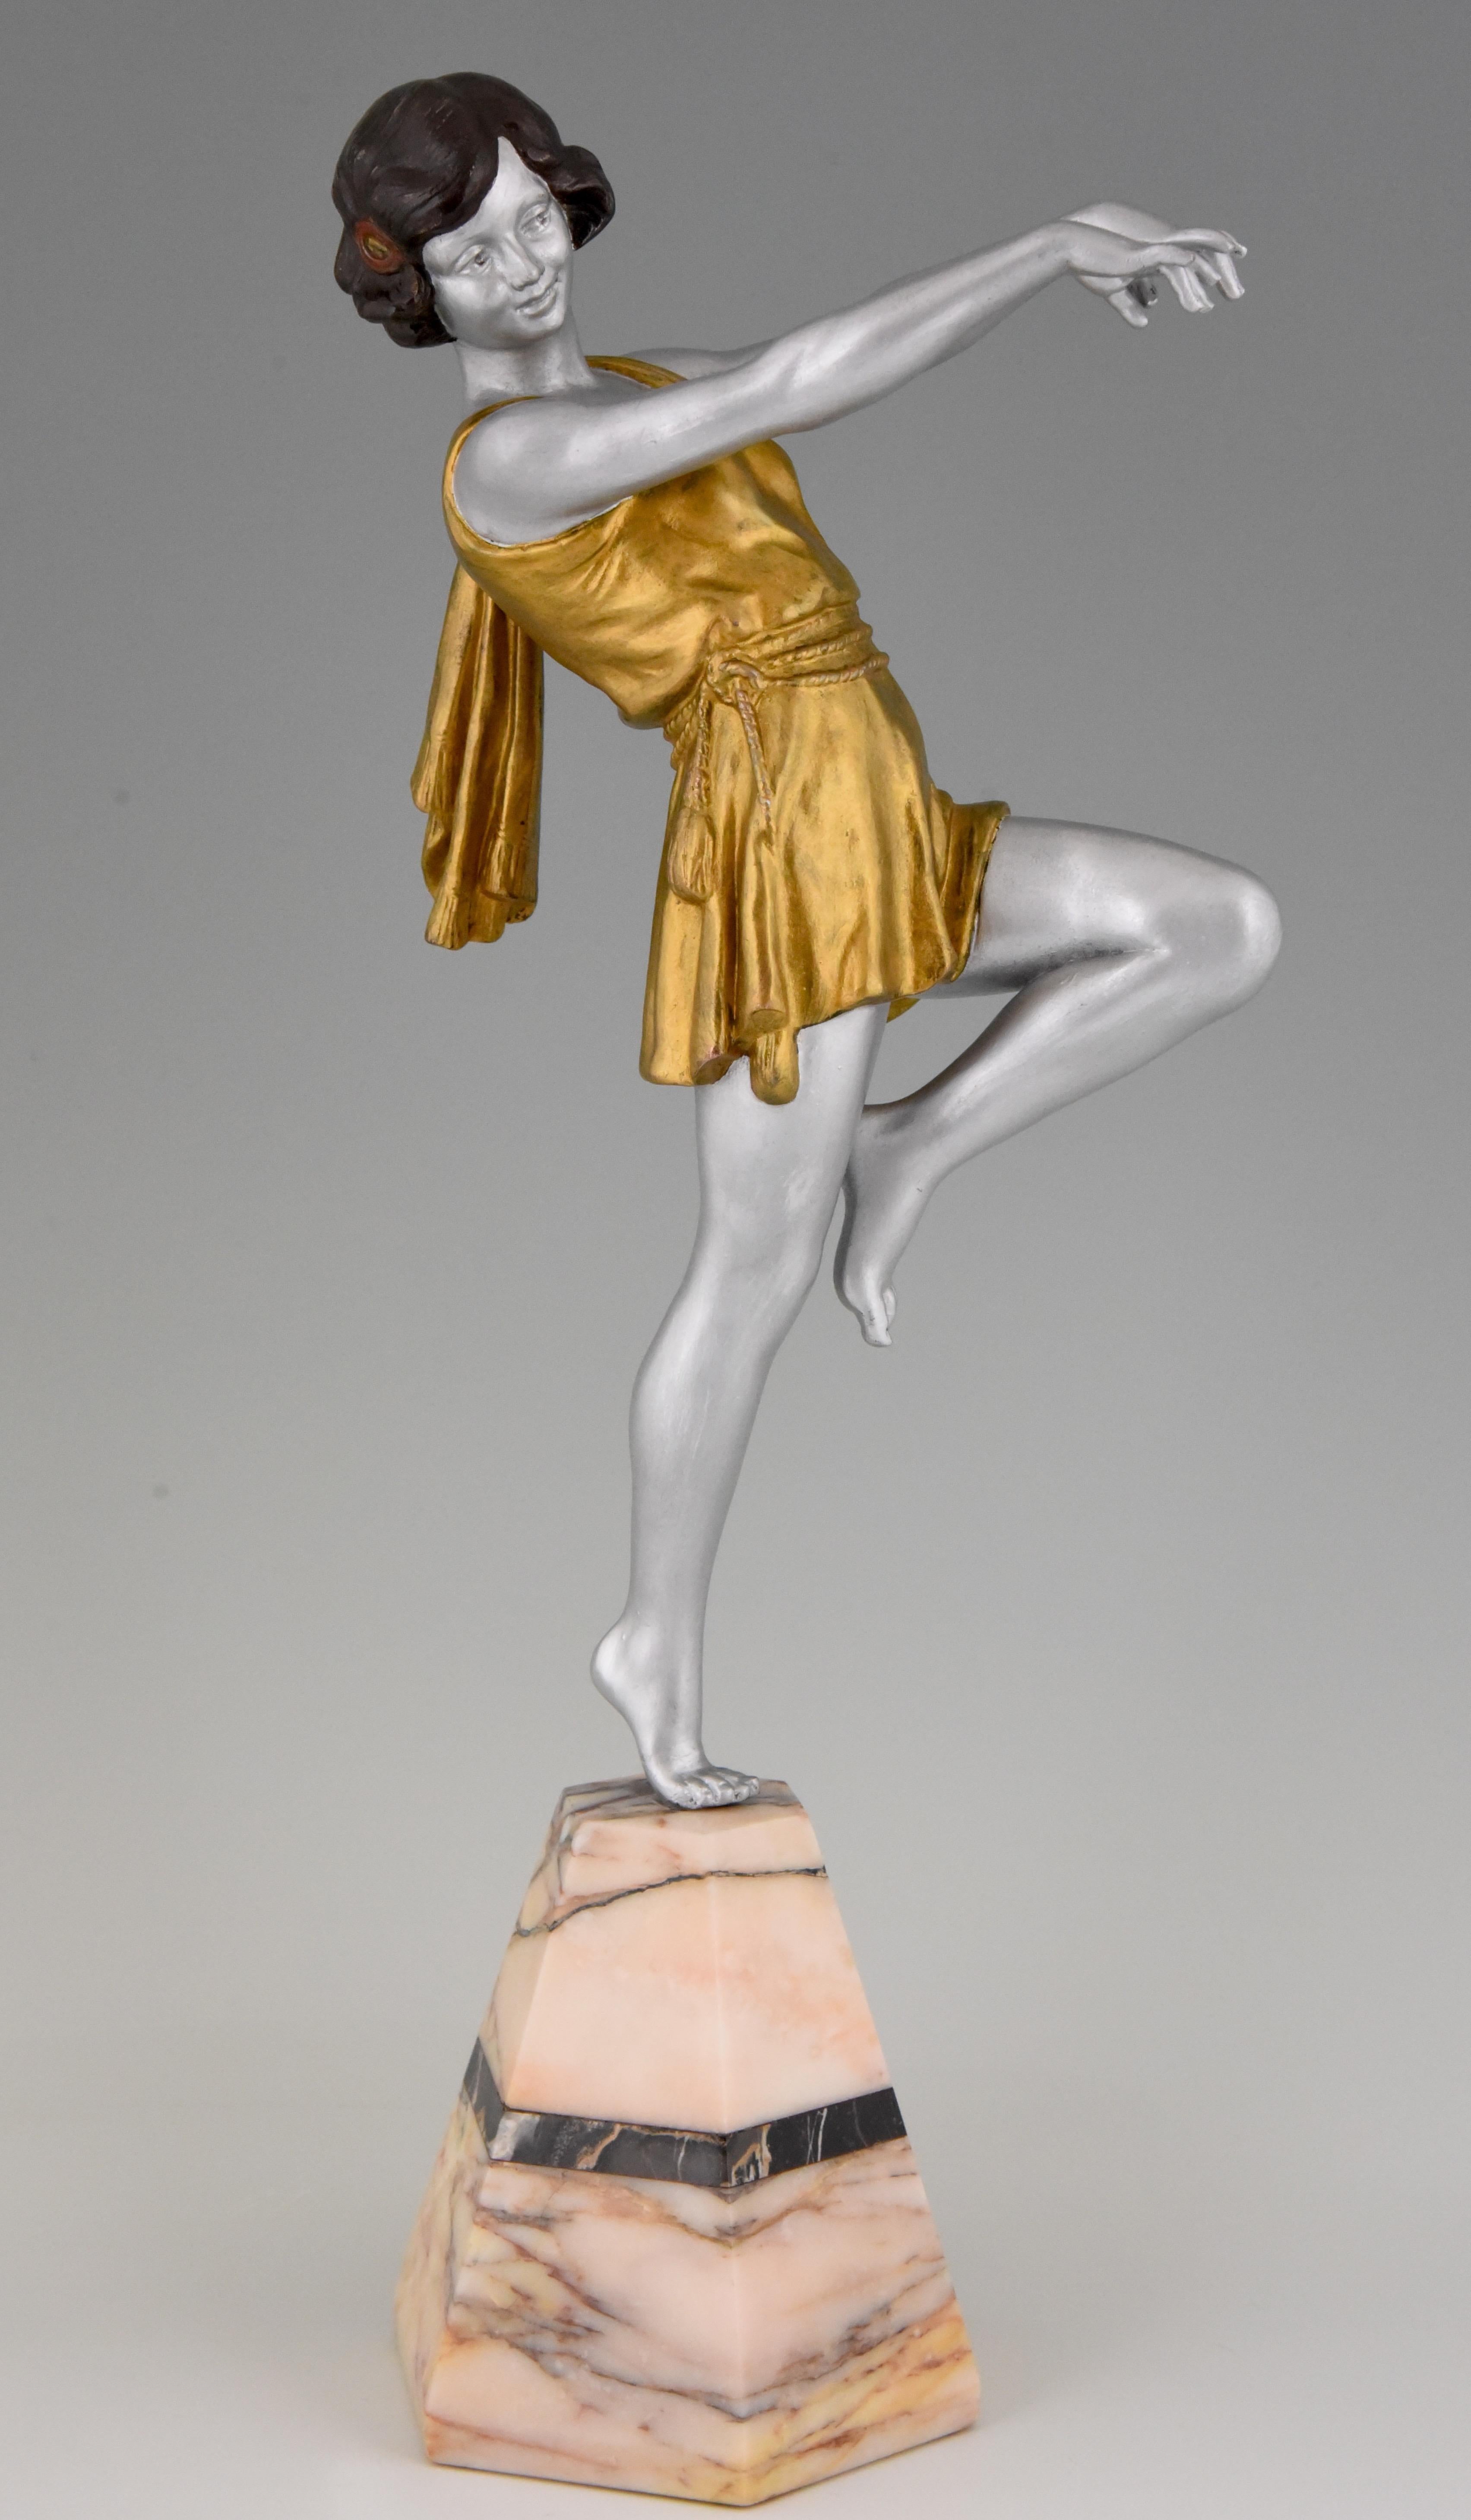 Lovely Art Deco sculpture of a dancer on a marble base signed by Emile Cartier, cold painted multi-color patina, France, 1930.
This model is illustrated on page 440 of the book? “Bronzes, sculptors and founders” by H. Berman, Abage.? “Art deco